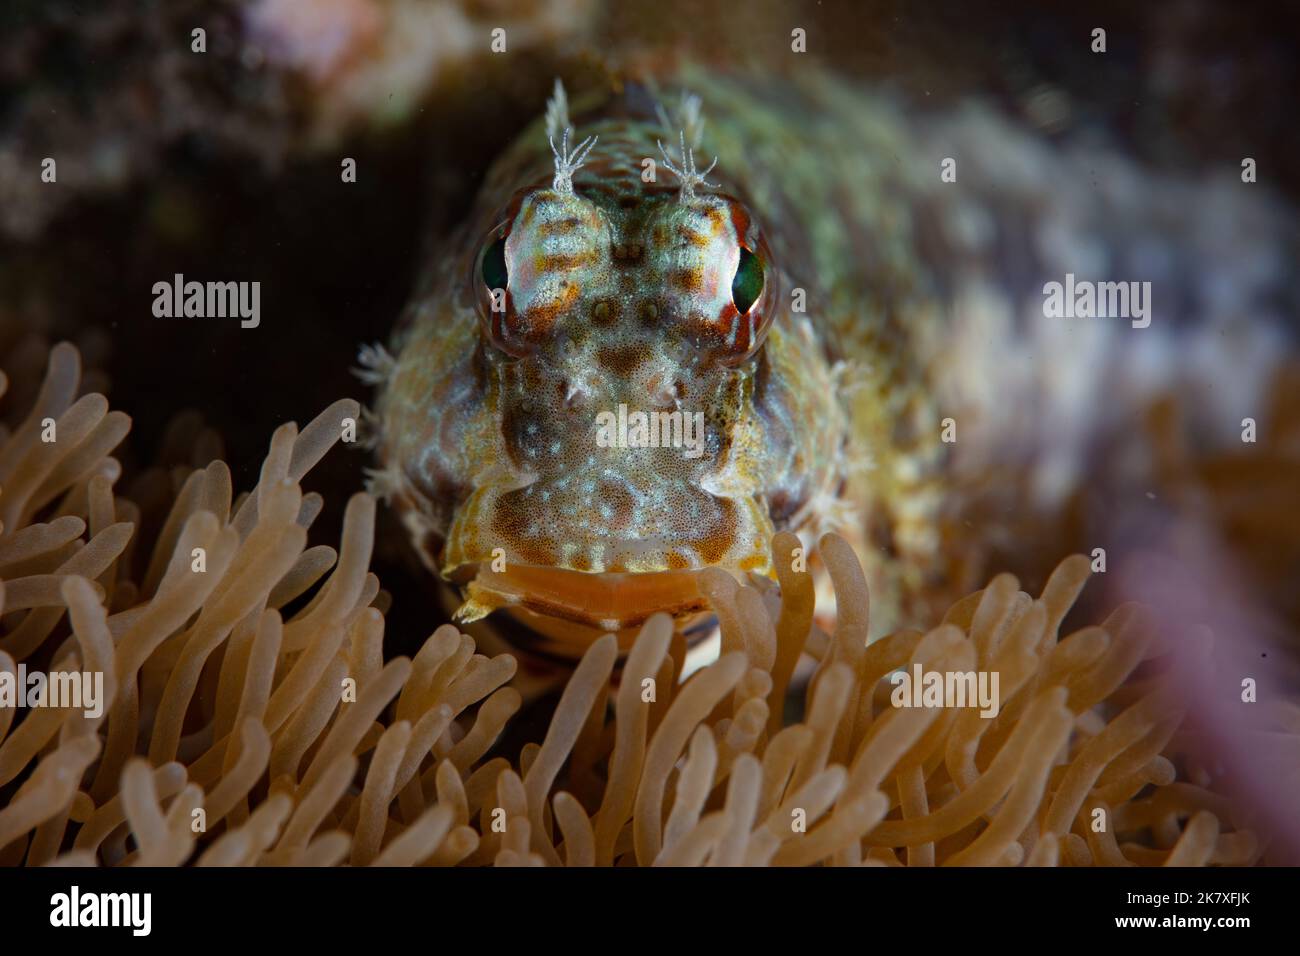 A Jeweled blenny, Salarias fasciatus, lays on coral near Alor, Indonesia. Blennies are common inhabitants of coral reefs. Stock Photo